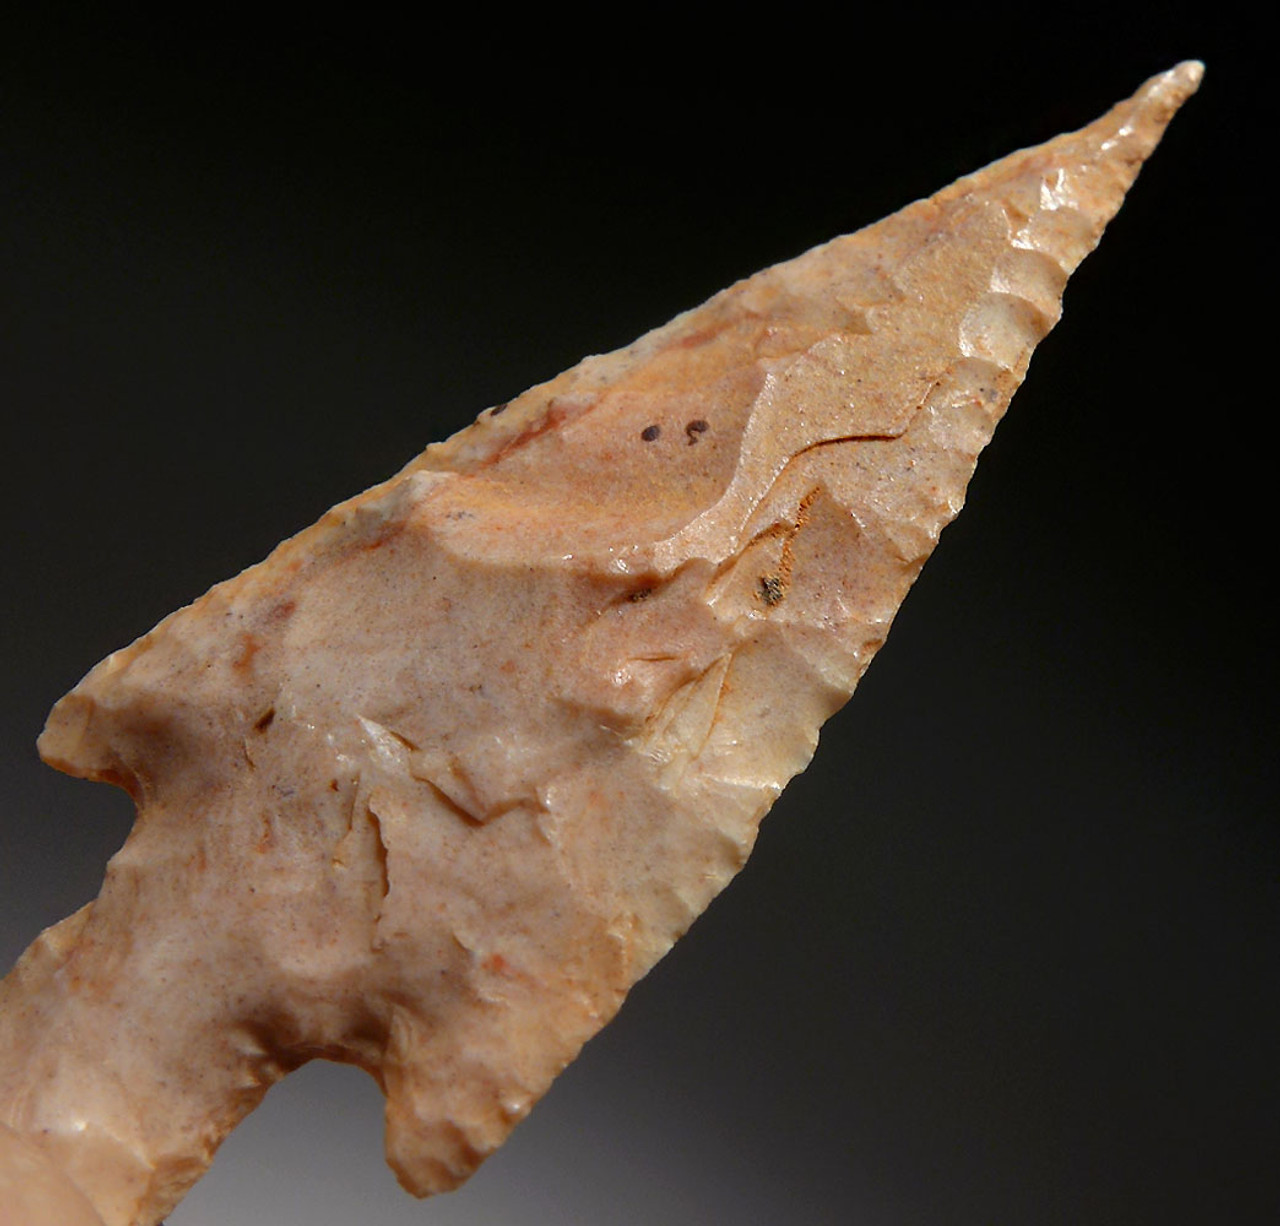 FINEST MOTTLED PINK TAPERED NEEDLE TIP ARROWHEAD OF THE CAPSIAN AFRICAN NEOLITHIC  *CAP279